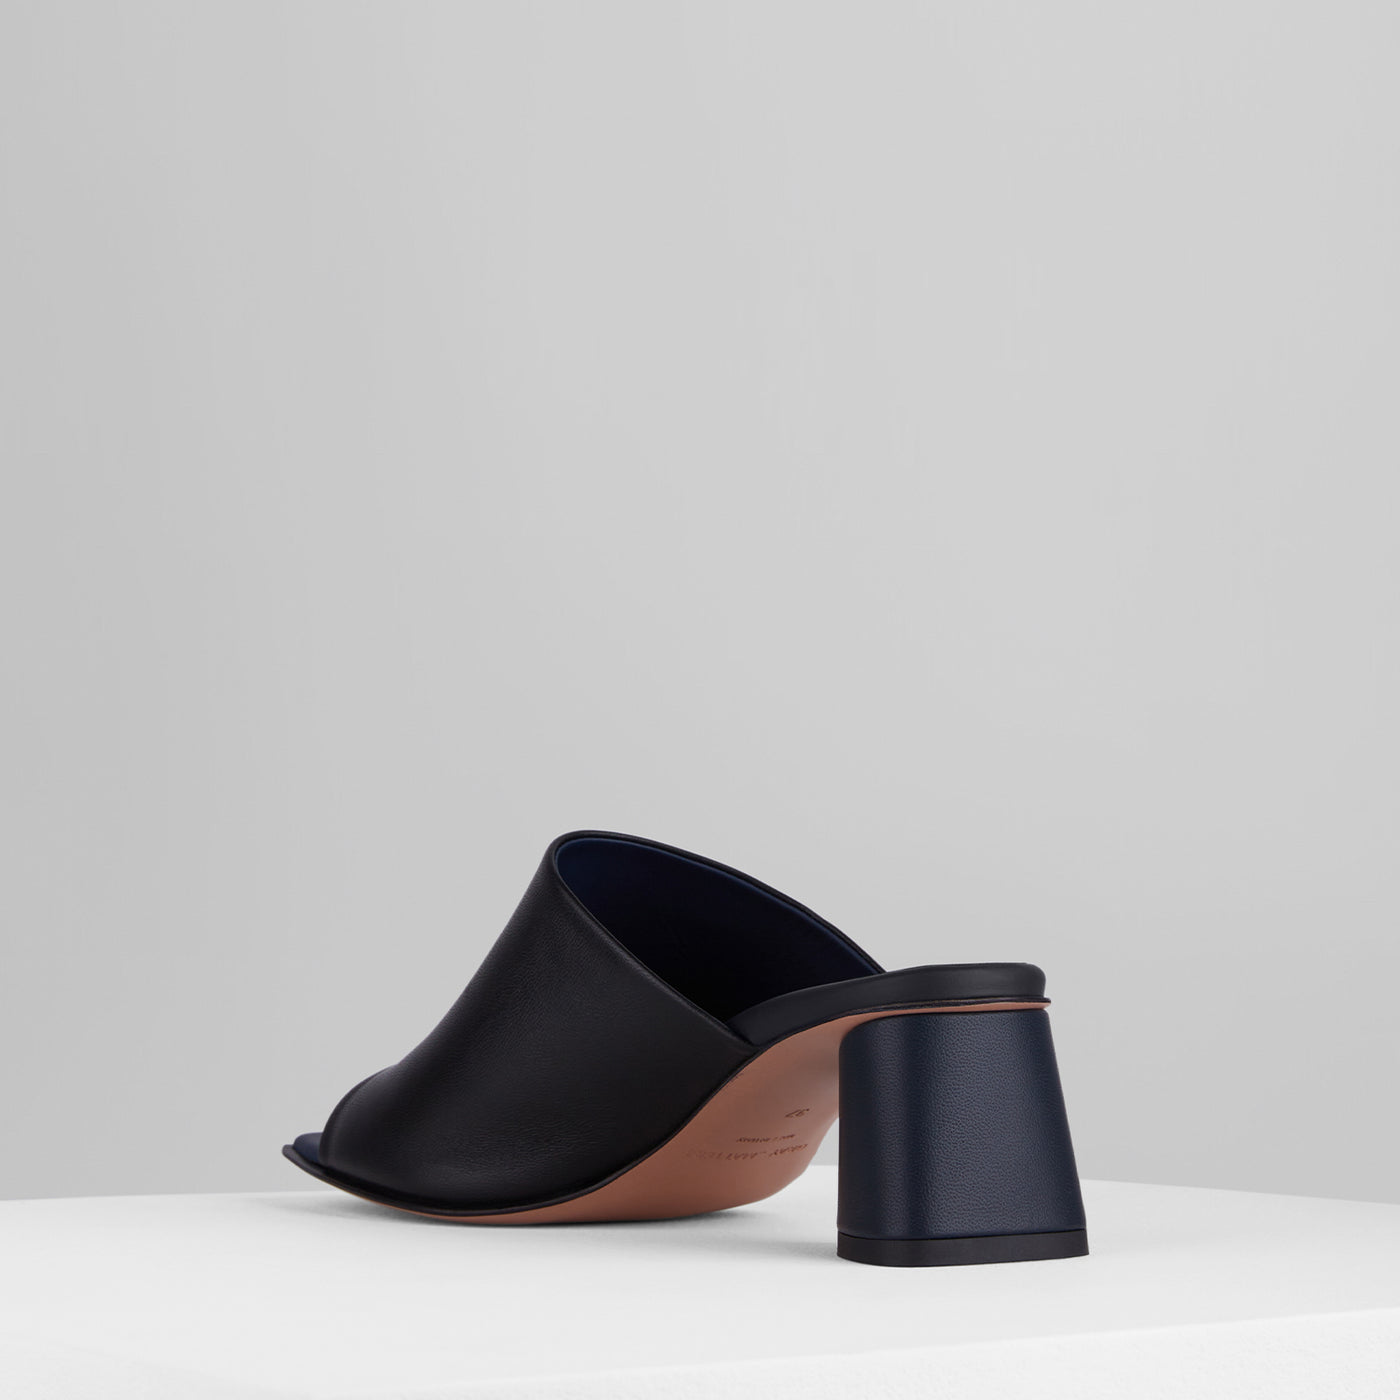 Load image into Gallery viewer, Spacco Sandals in Nero